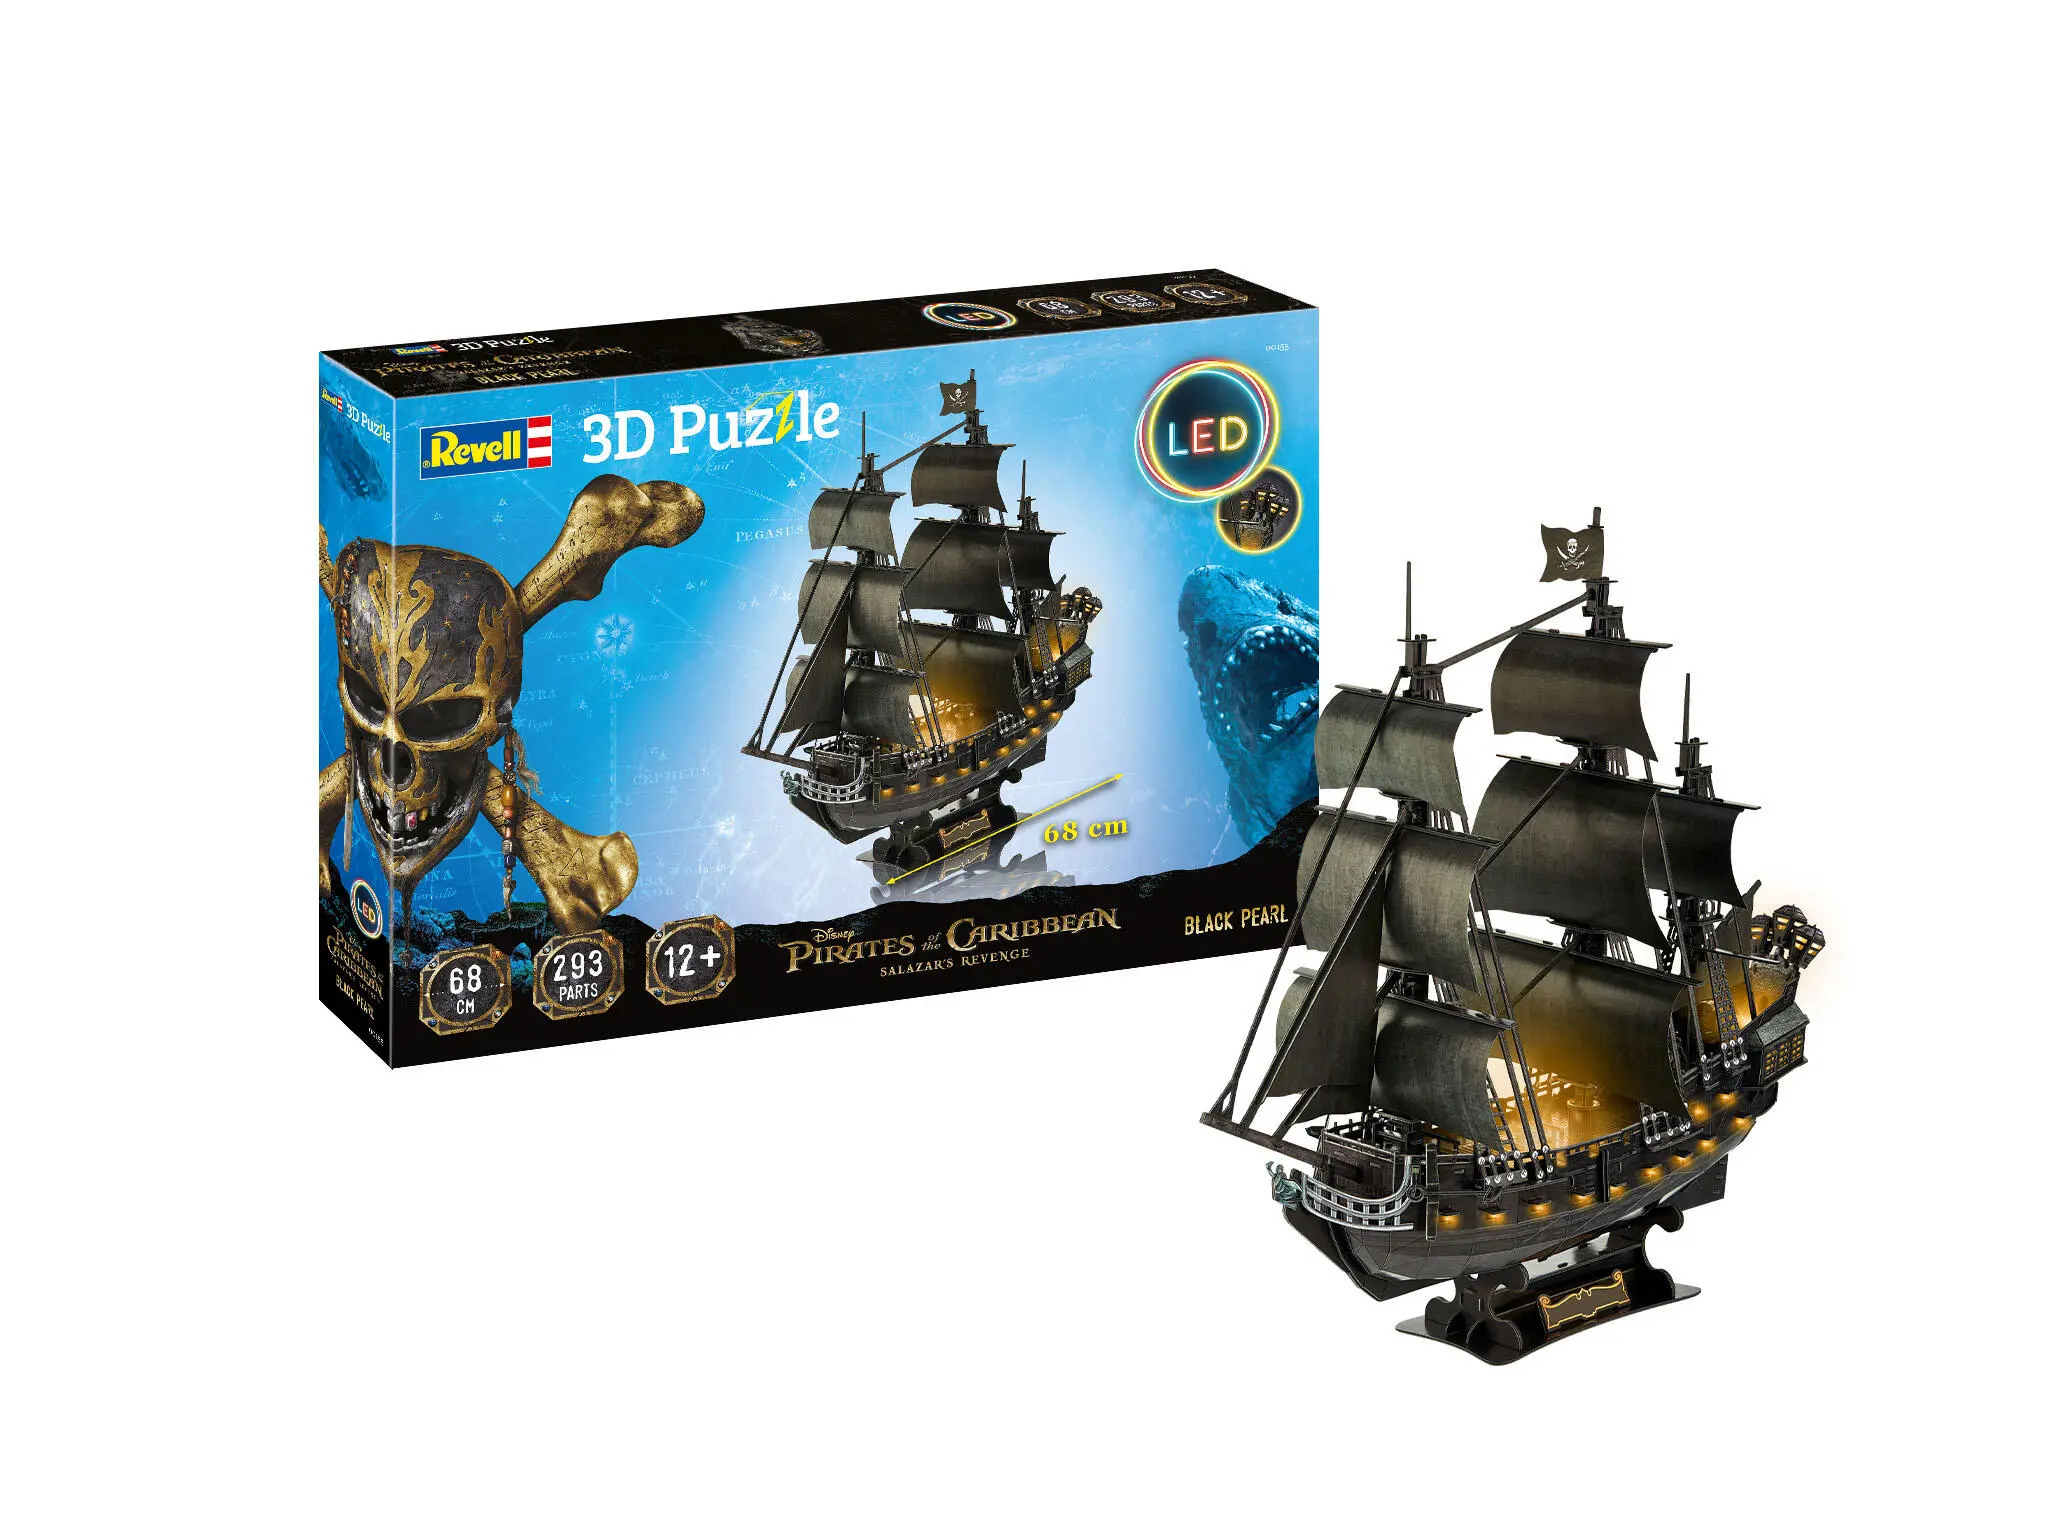 Revell 00155 - Black Pearl - LED Edition 3D Puzzle